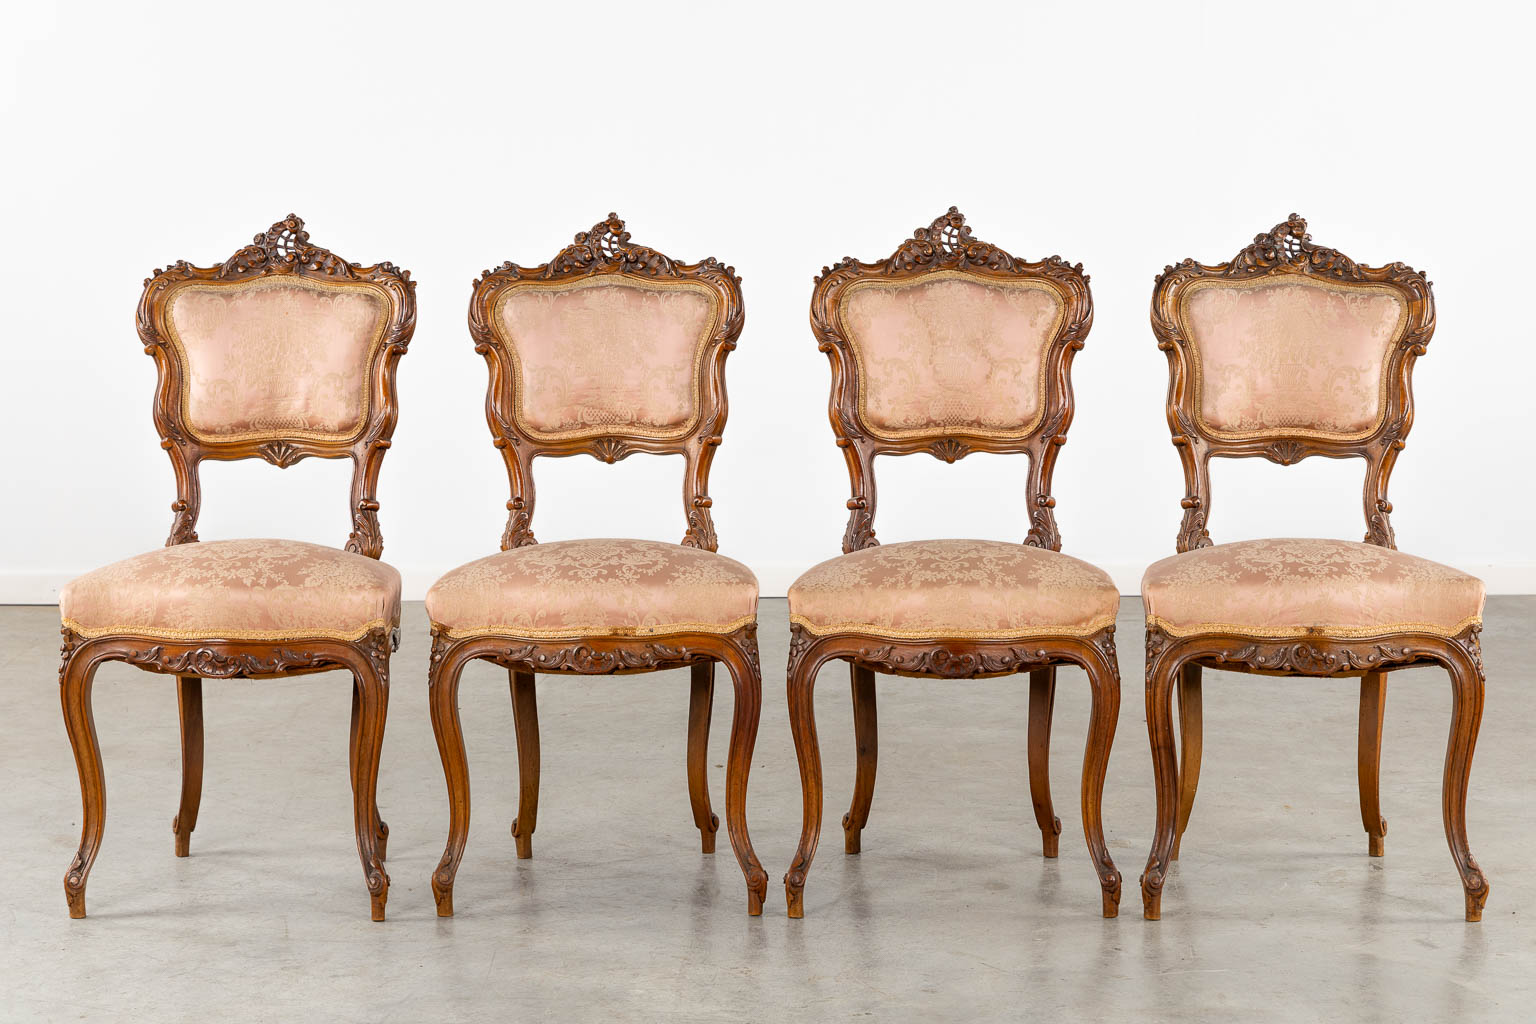 An 8-piece salon suite, sculptured wood in Louis XV style. Circa 1900. (L:67 x W:135 x H:103 cm) - Image 12 of 33